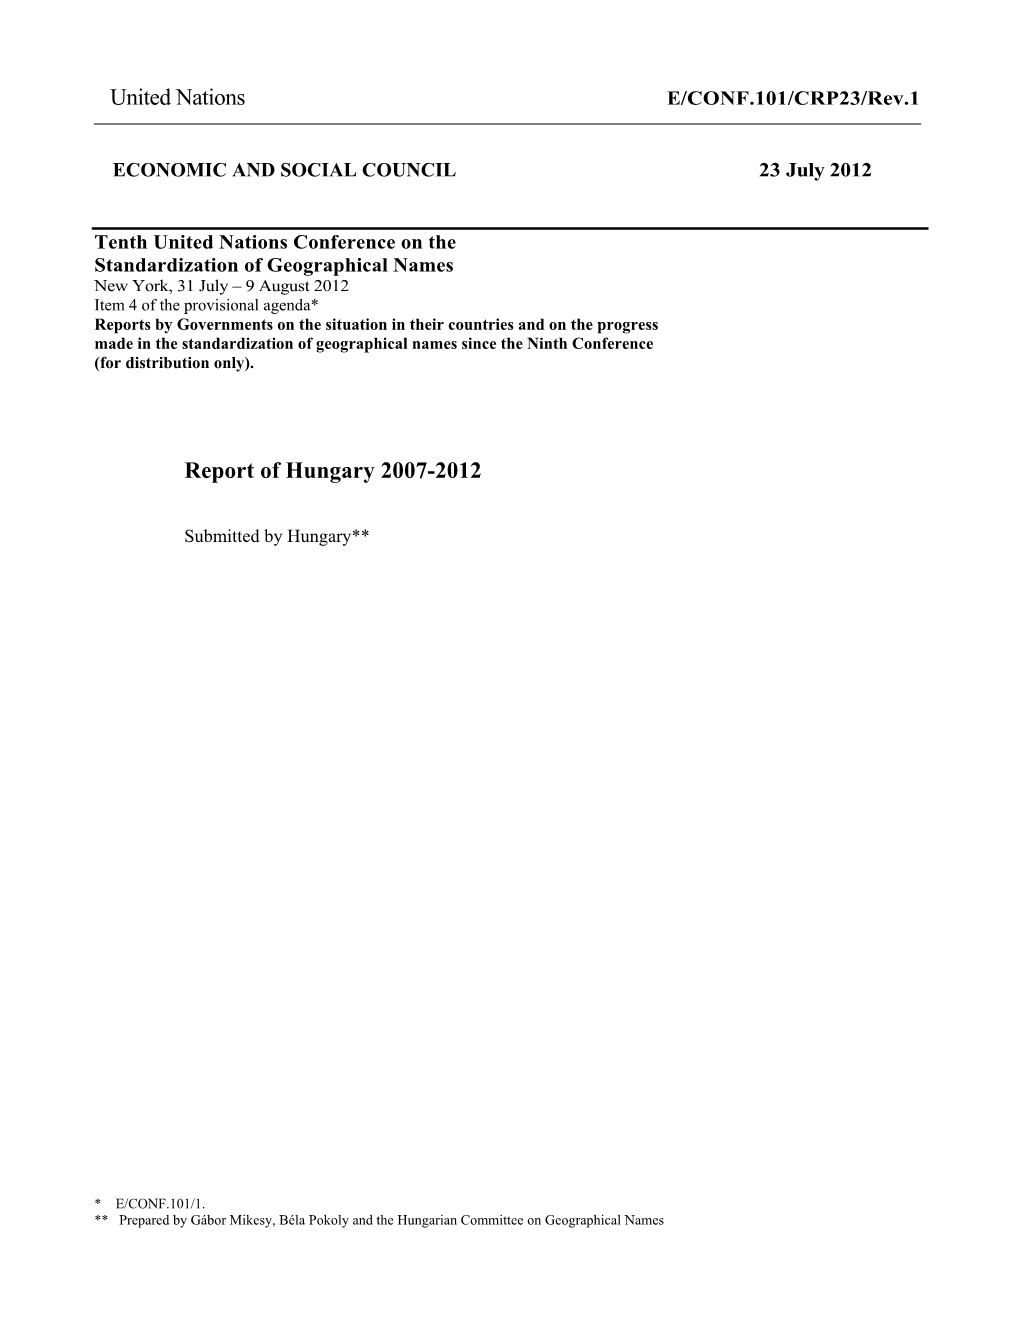 United Nations Report of Hungary 2007-2012